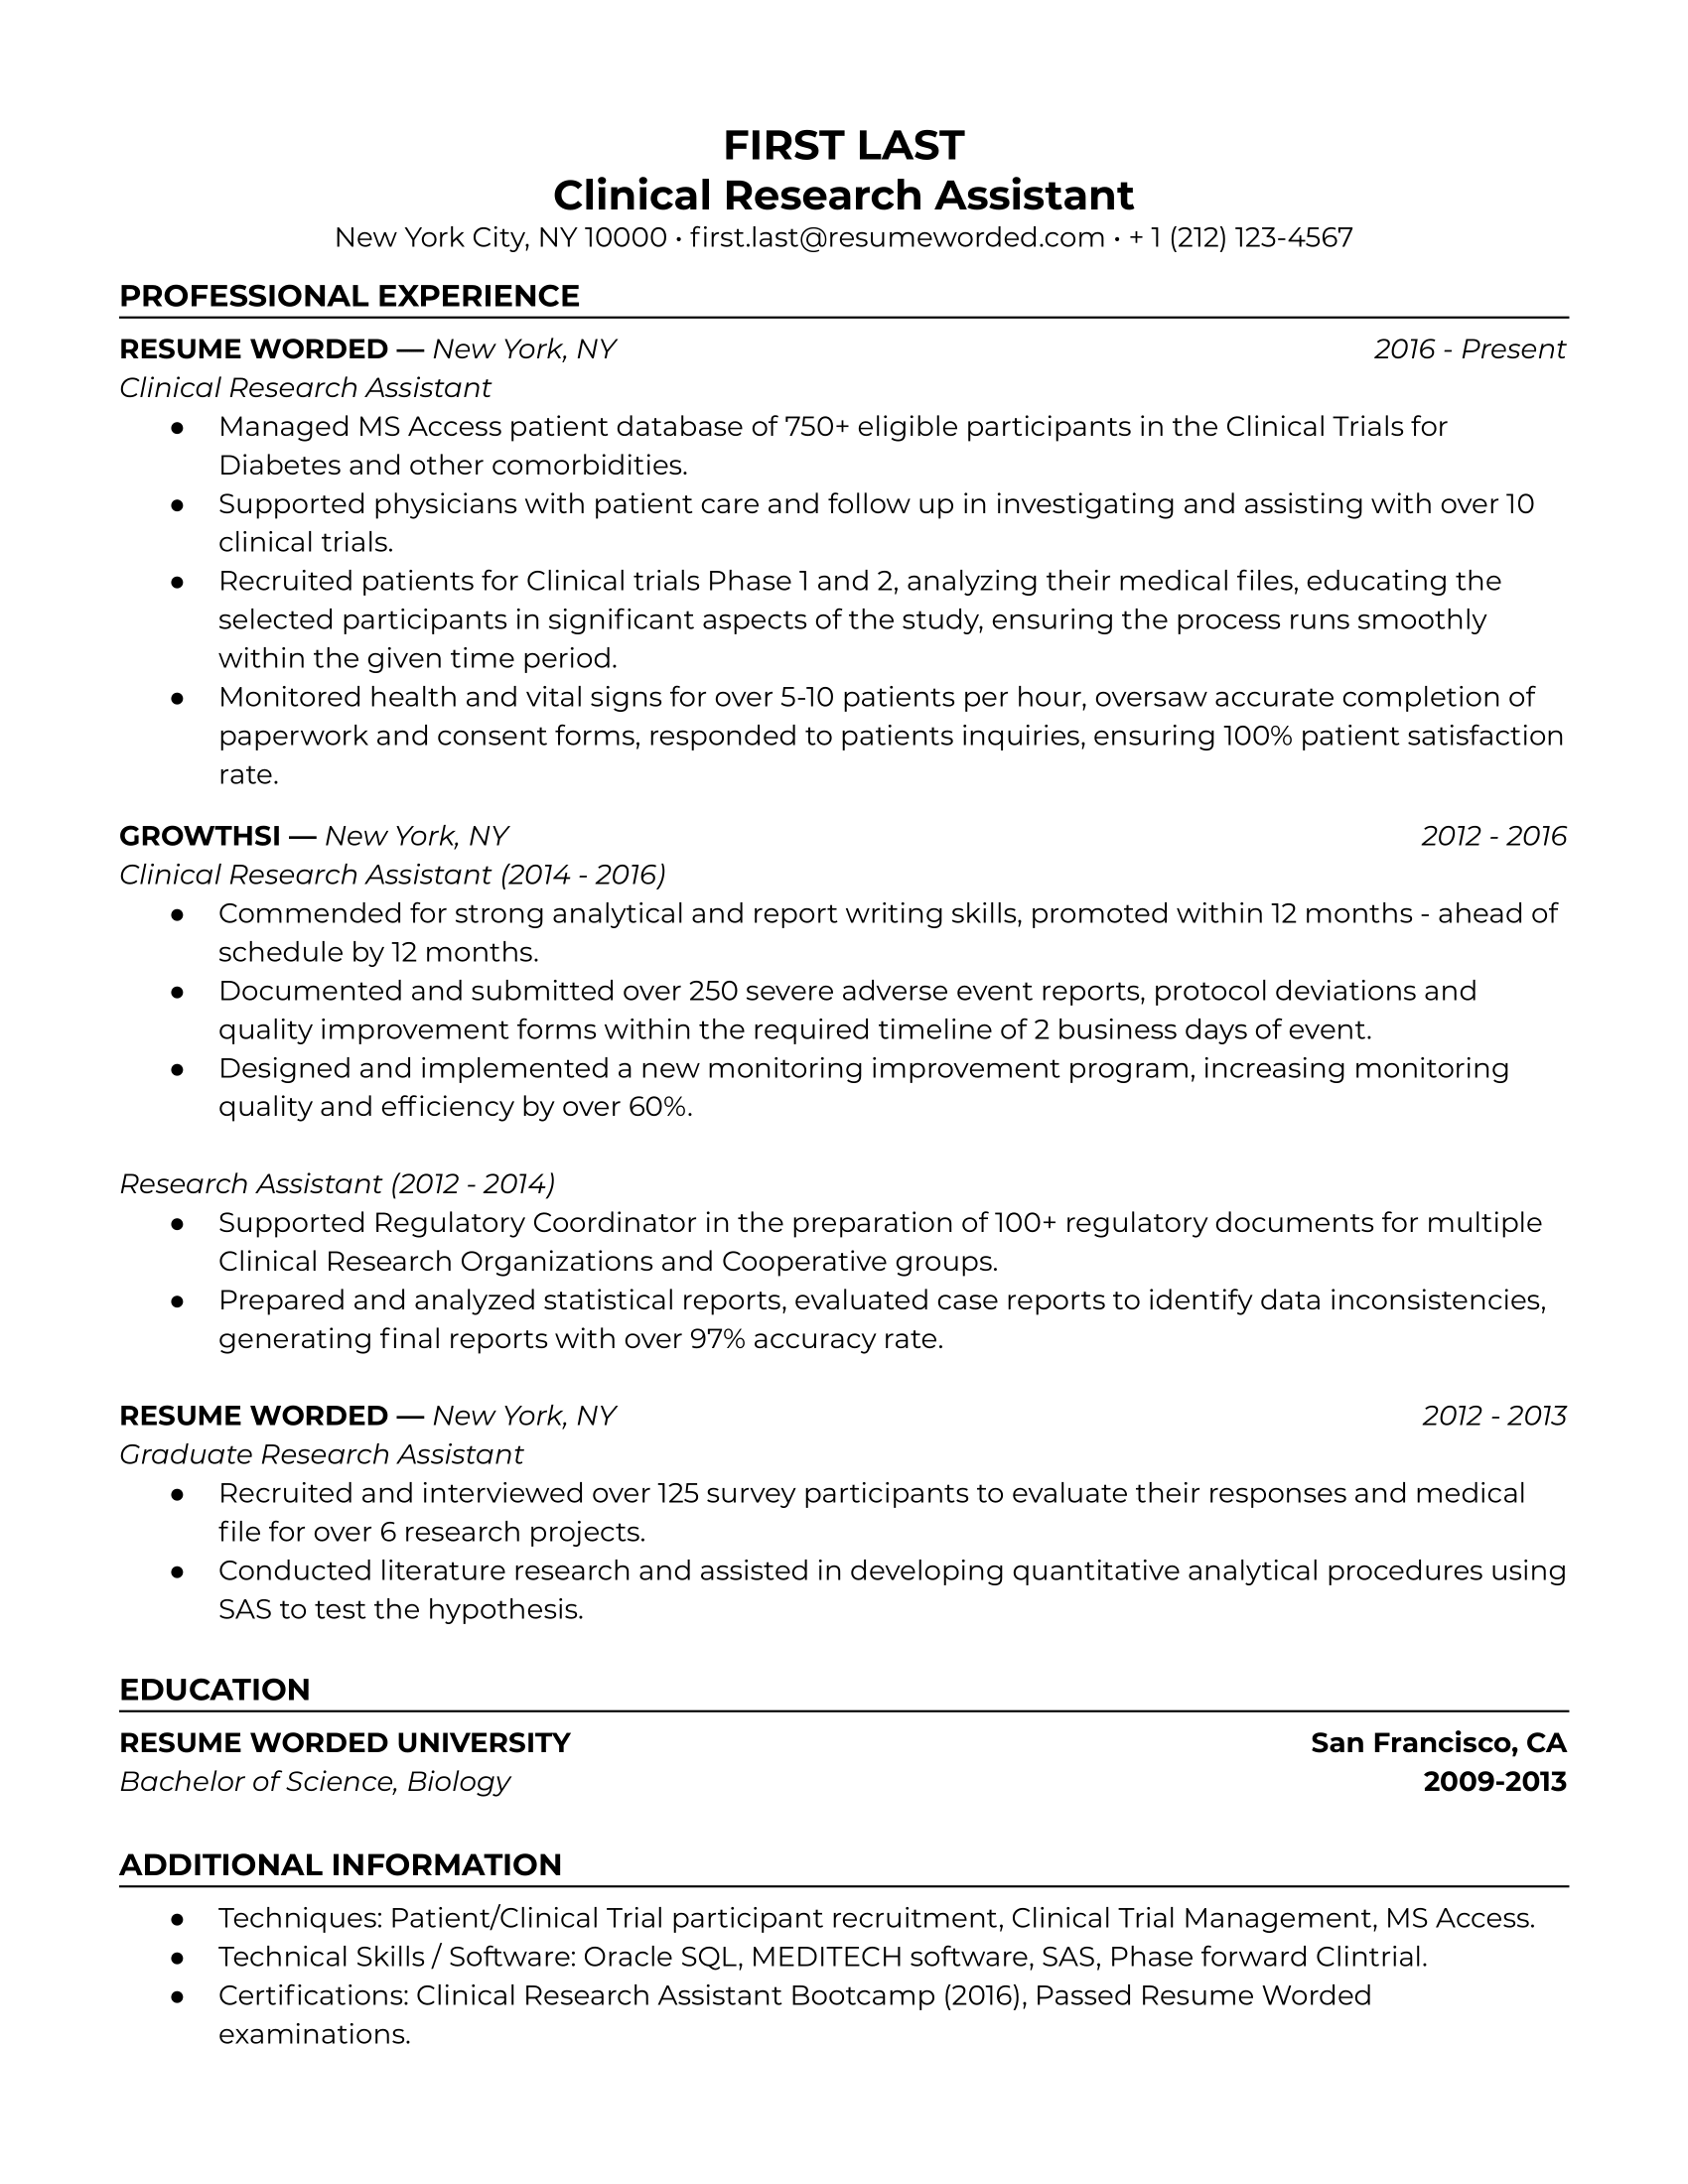 Resume example for a Clinical Research Assistant job